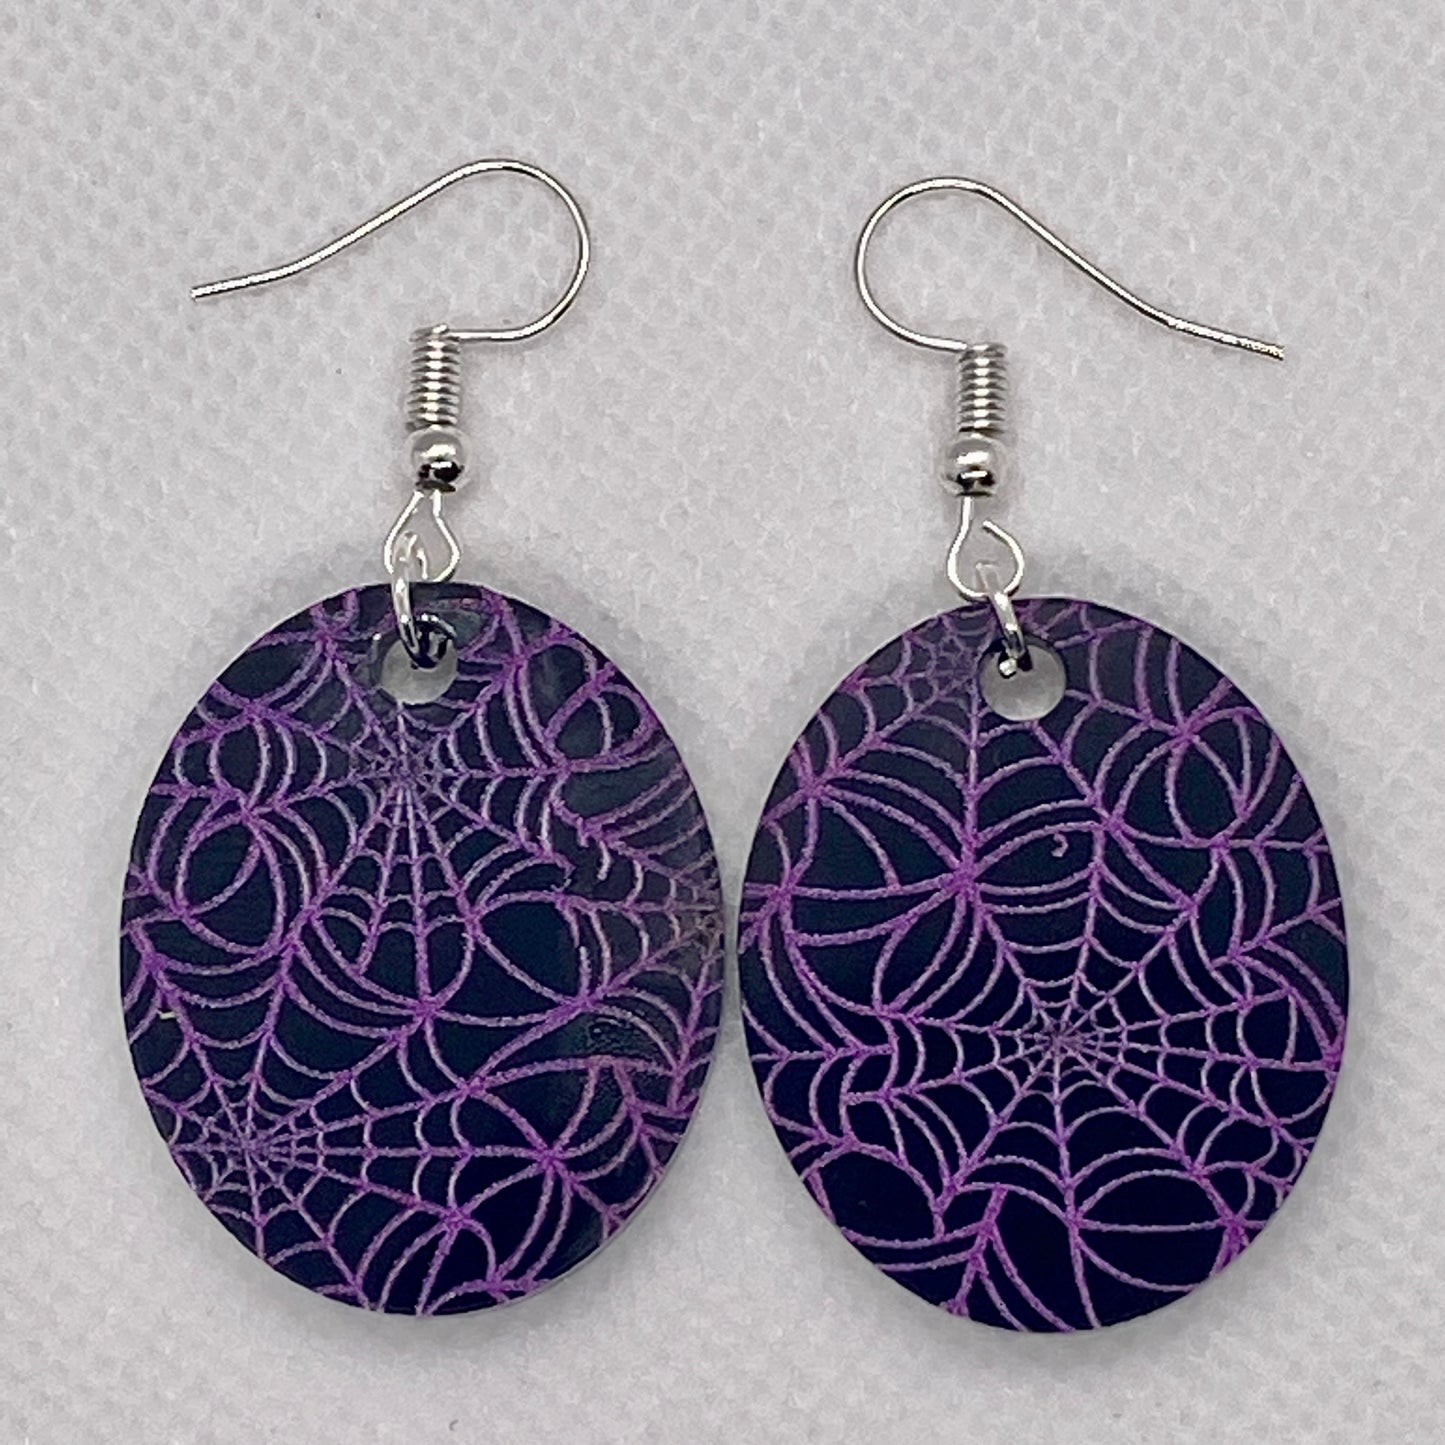 Spiderweb Print Acrylic Earrings (Choice of shape and color!)